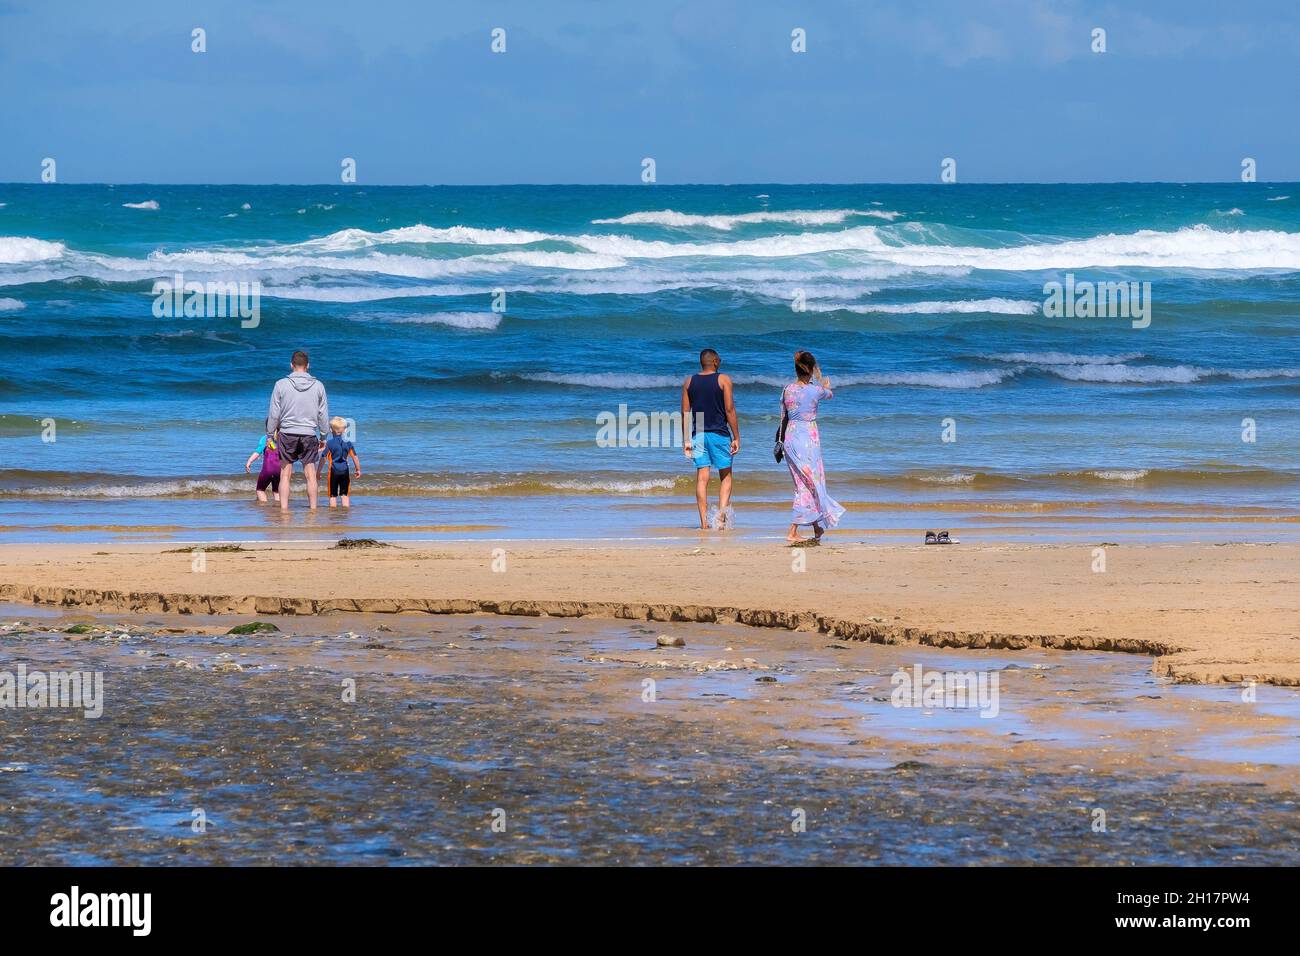 Mawgan Porth beach in Cornwall, holidaymakers standing on the shoreline enjoying the view on their staycation Cornish holiday. Stock Photo